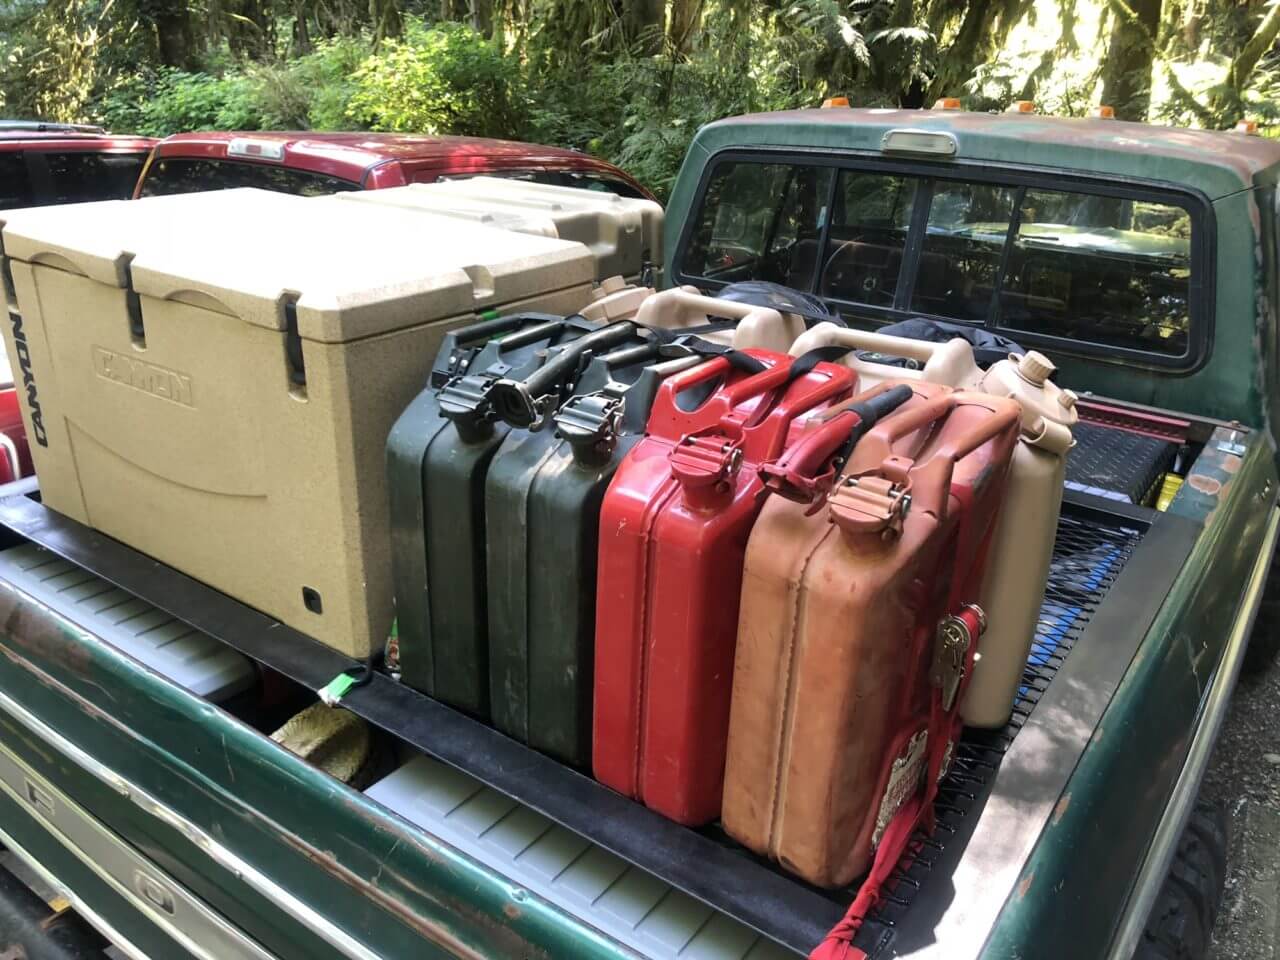 02 spare fuel cans